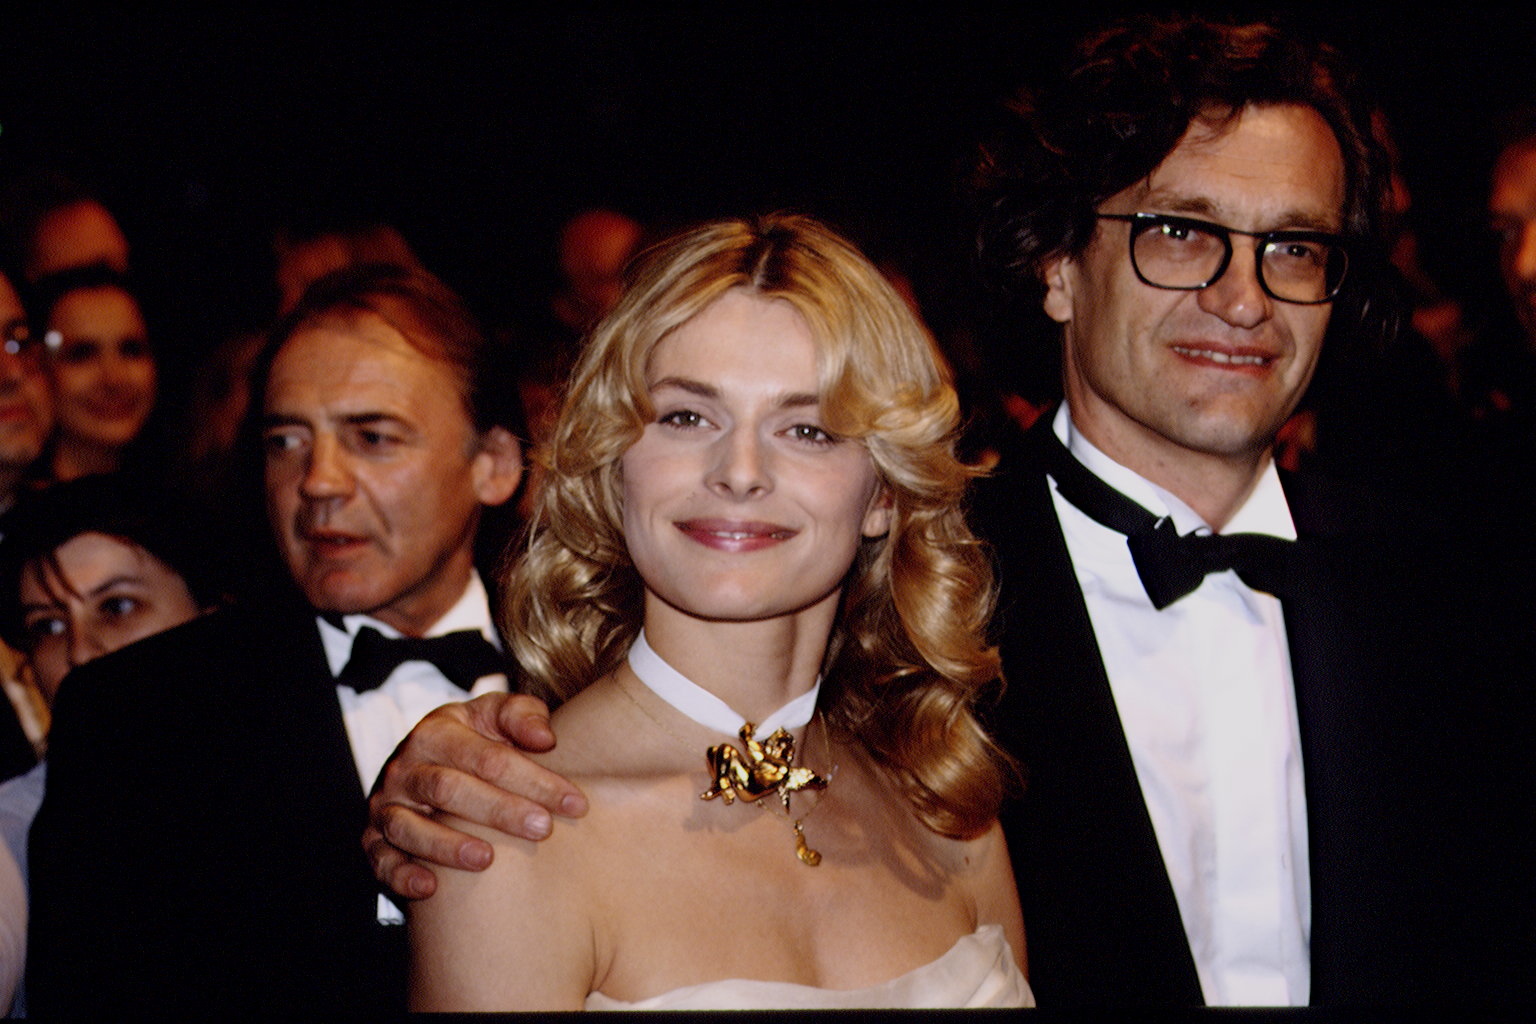 <p>In 1993, she answered the call of Wim Wenders to star for the third time in one of his films: 'Faraway, So Close!' Subsequently, the actress decided to move back to the United States. This period marked the beginning of a slow decline in her stardom.</p>